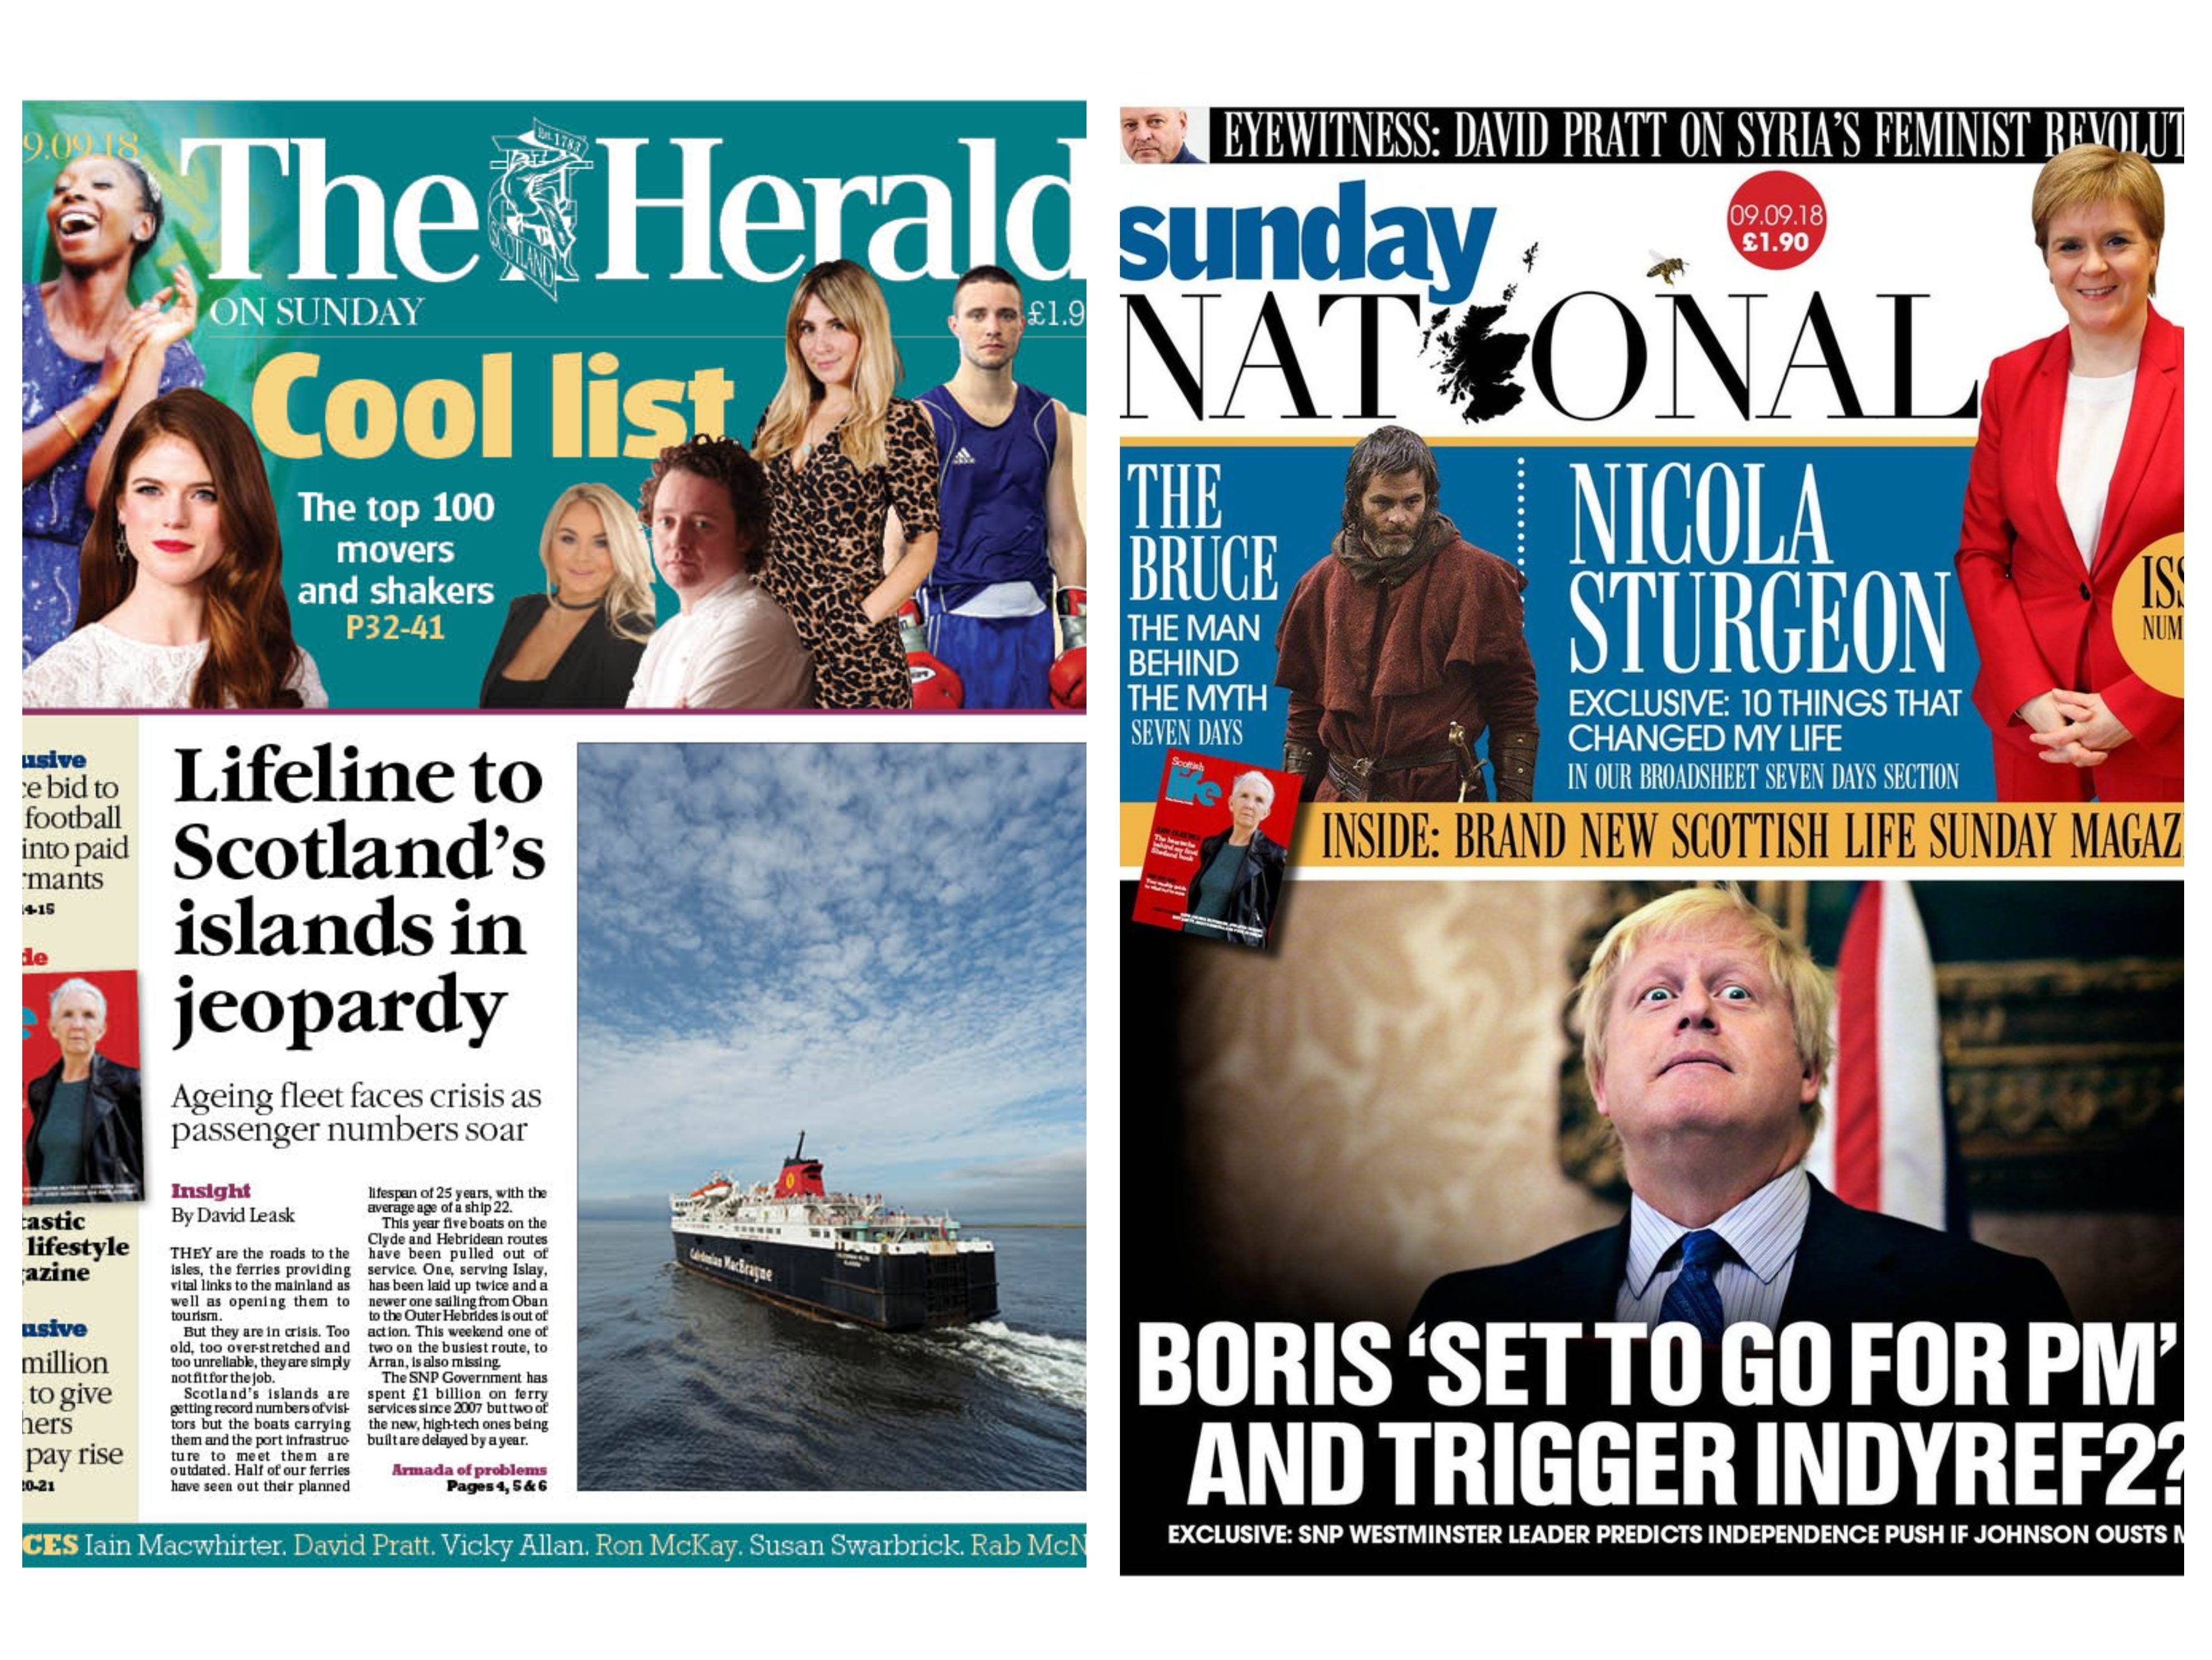 Scotland's Herald and Times group posts £7m pre-tax loss amid falling turnover